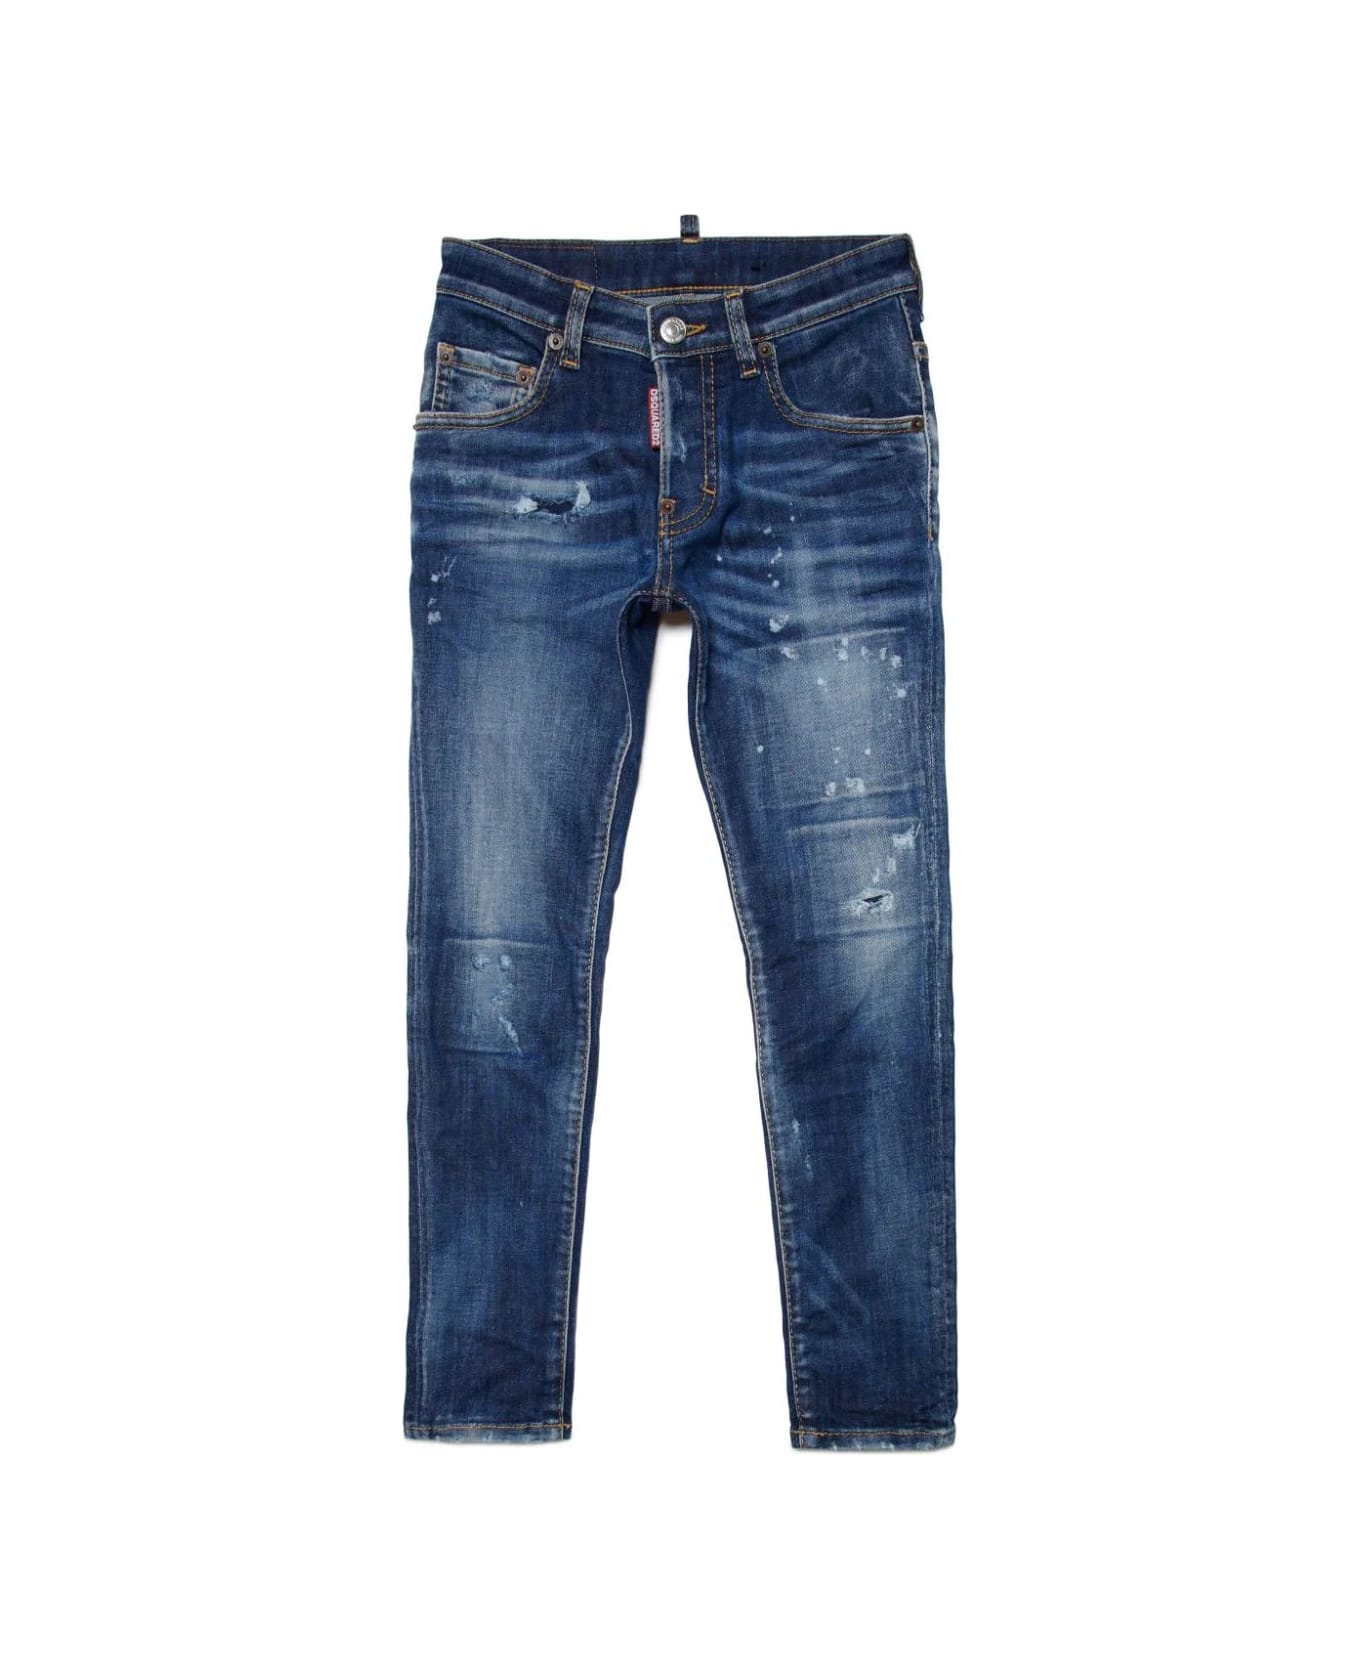 Dsquared2 Skater Skinny Jeans In Dark Blue Washed With Rips - Blue ボトムス